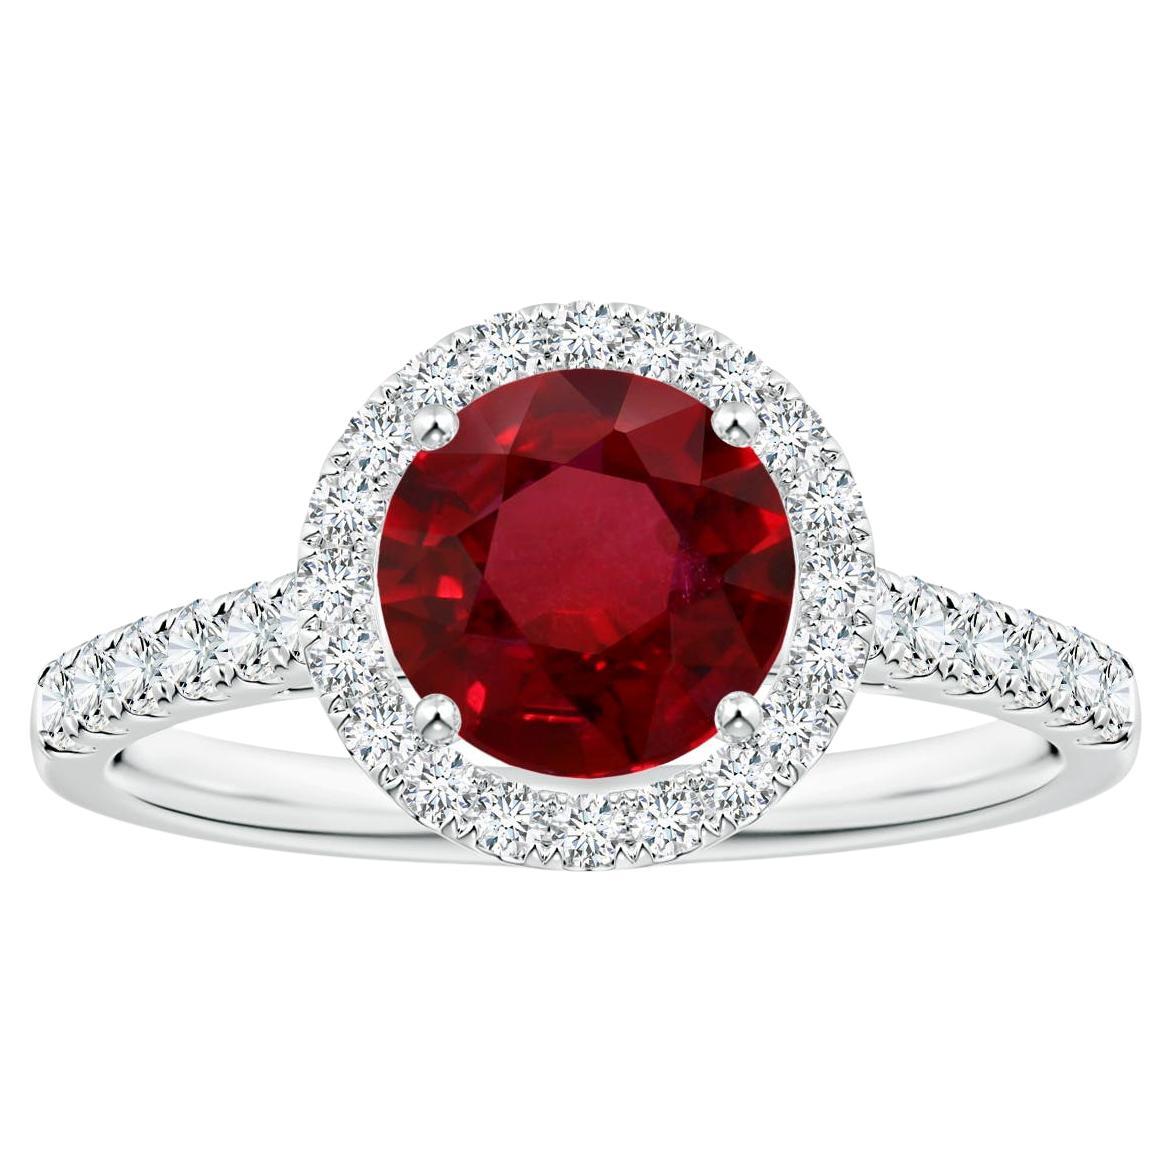 ANGARA GIA Certified Natural 1.54ct Ruby Halo Ring with Diamond in White Gold 